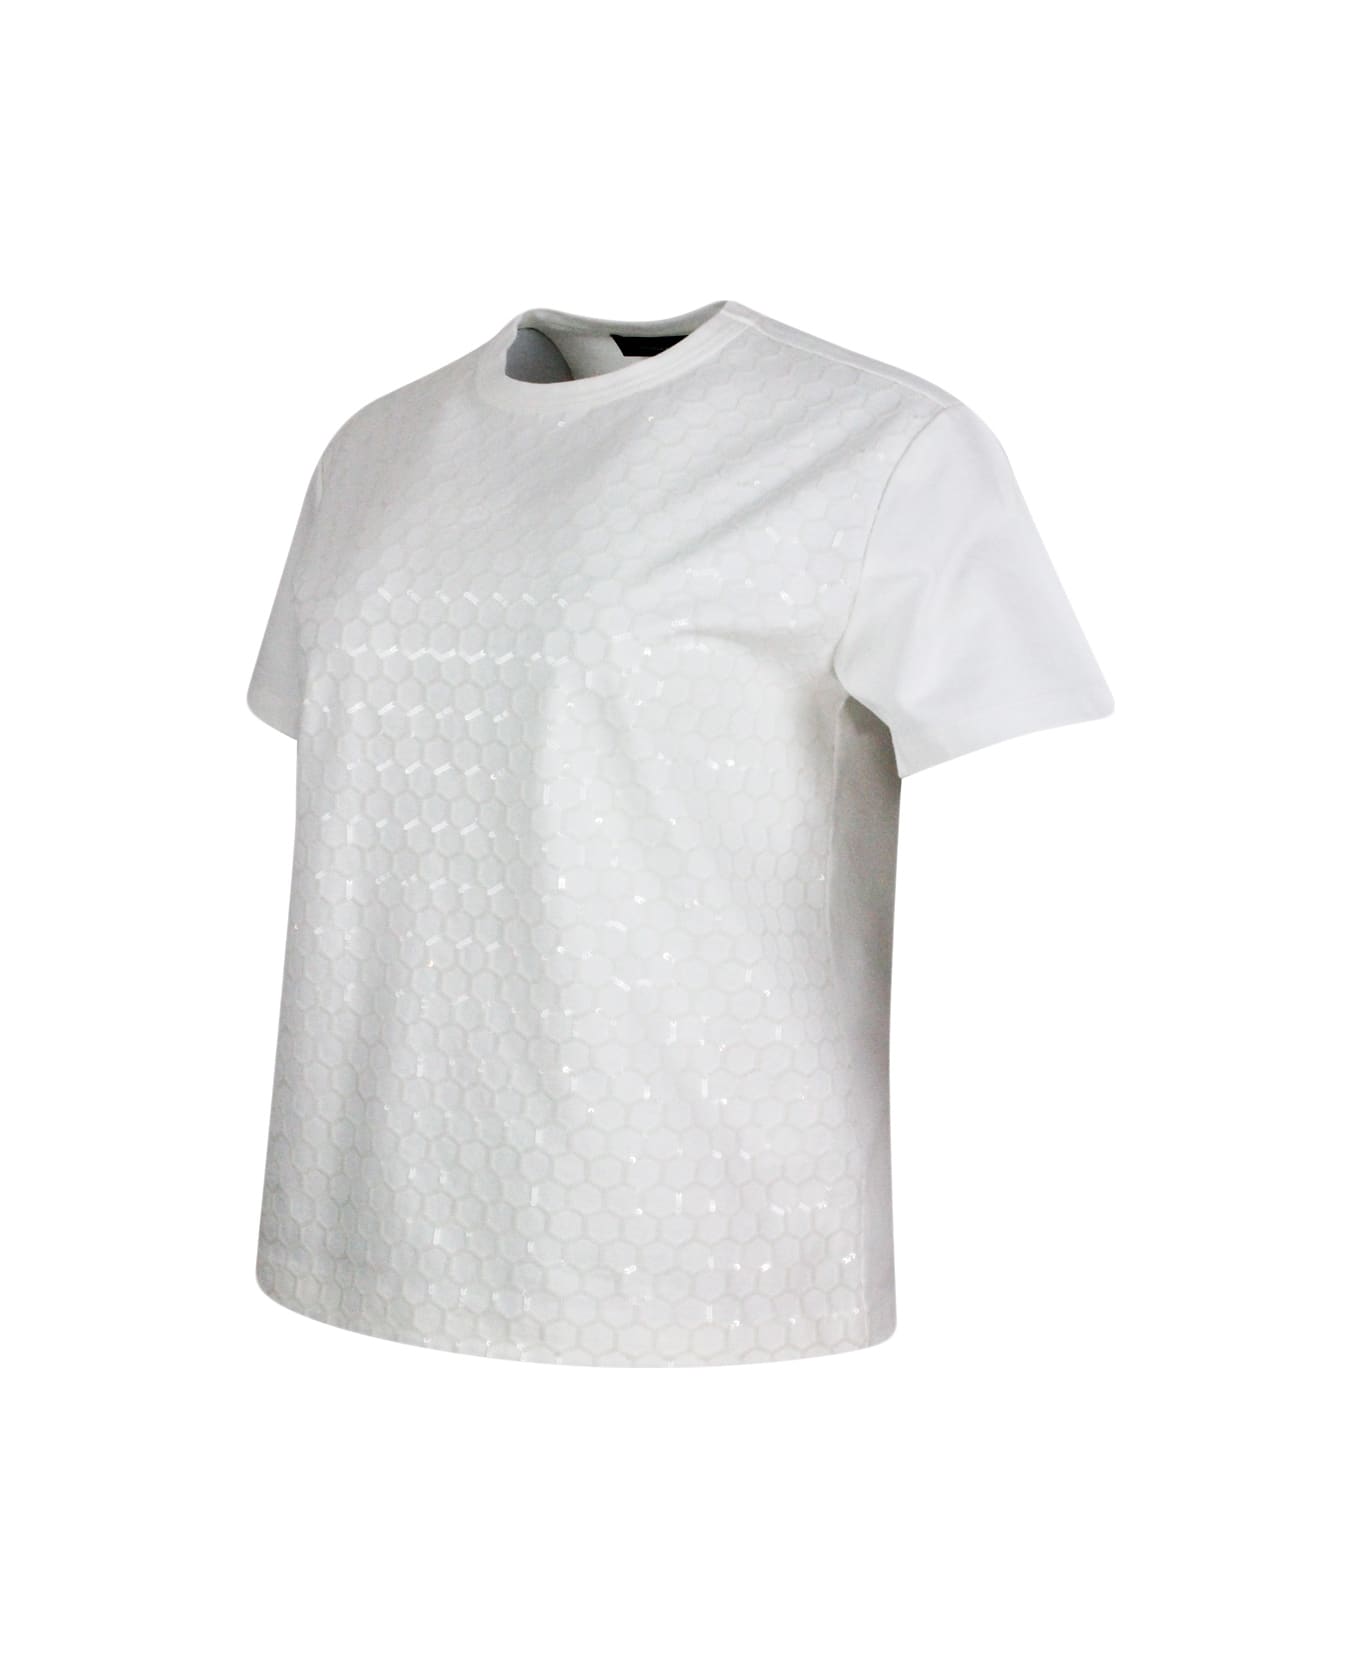 Fabiana Filippi Crew-neck, Short-sleeved T-shirt Made Of Soft Cotton Embellished With Sequin Applications That Give A Three-dimensional Effect To The Garment. - White